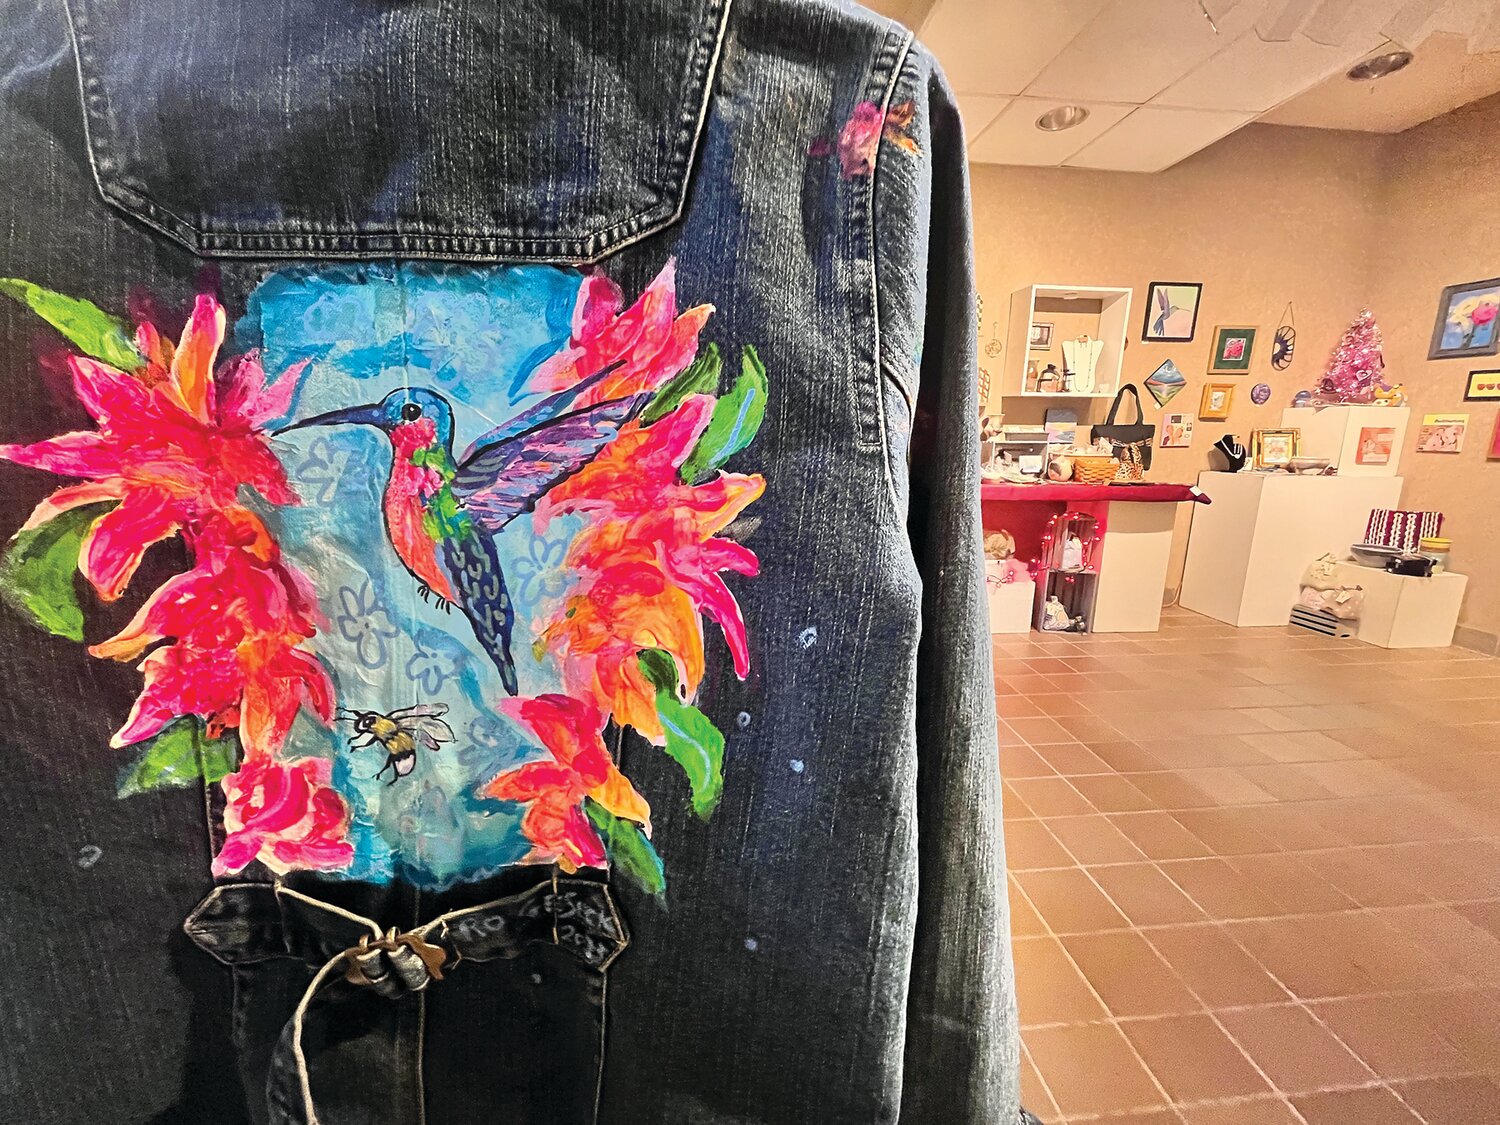 This “Geseck Jacket” is among the items for sale at The Baum School of Art’s Handmade Holiday Gift Shop.